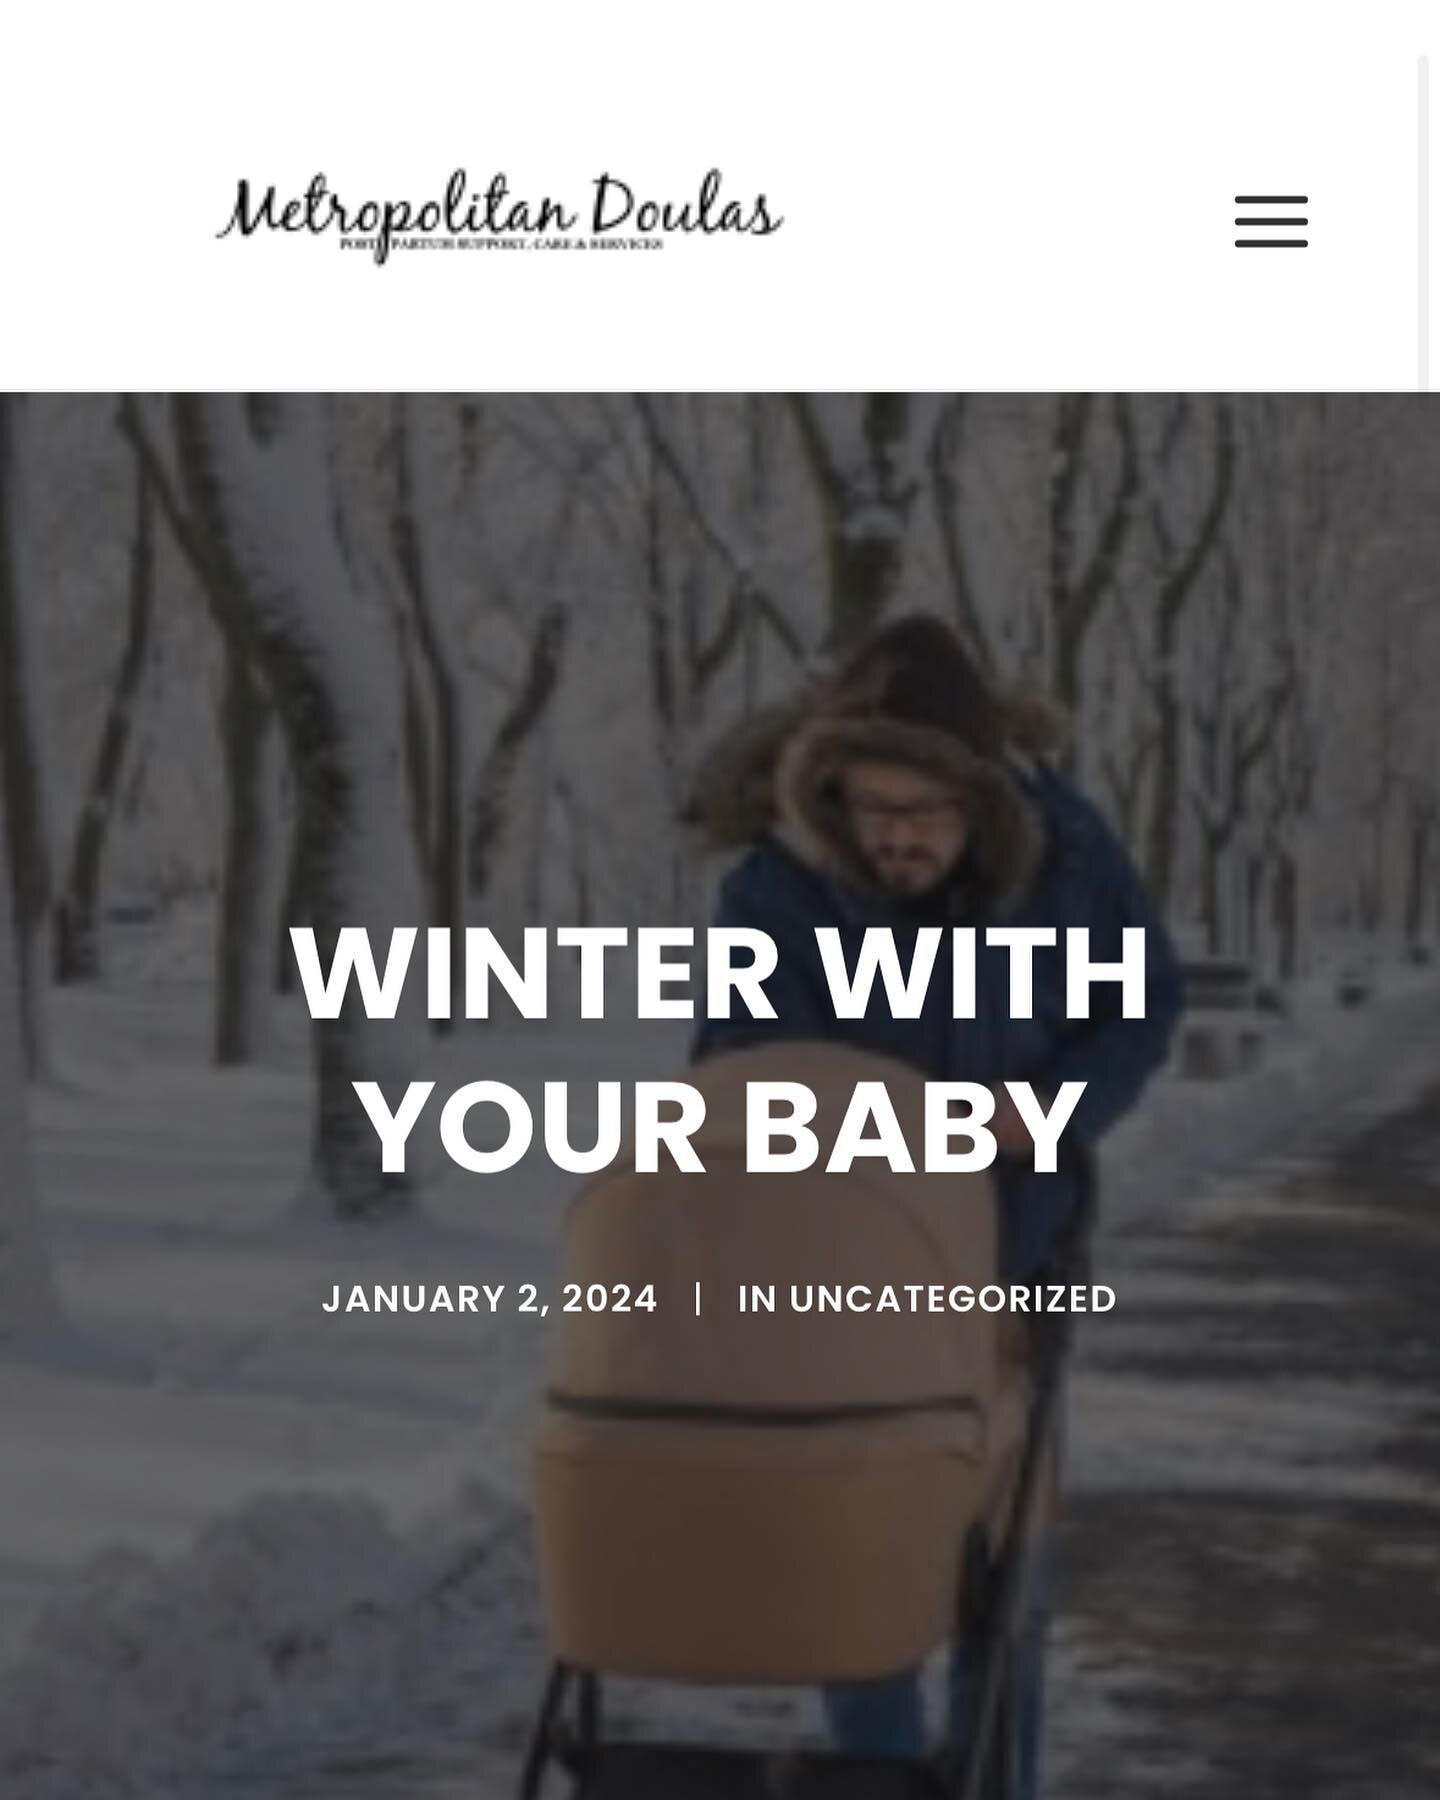 New blog post for Metropolitan Doulas, you can read about navigating the winter season with your baby here: https://metropolitandoulas.com/2024/01/02/winter-with-your-baby/